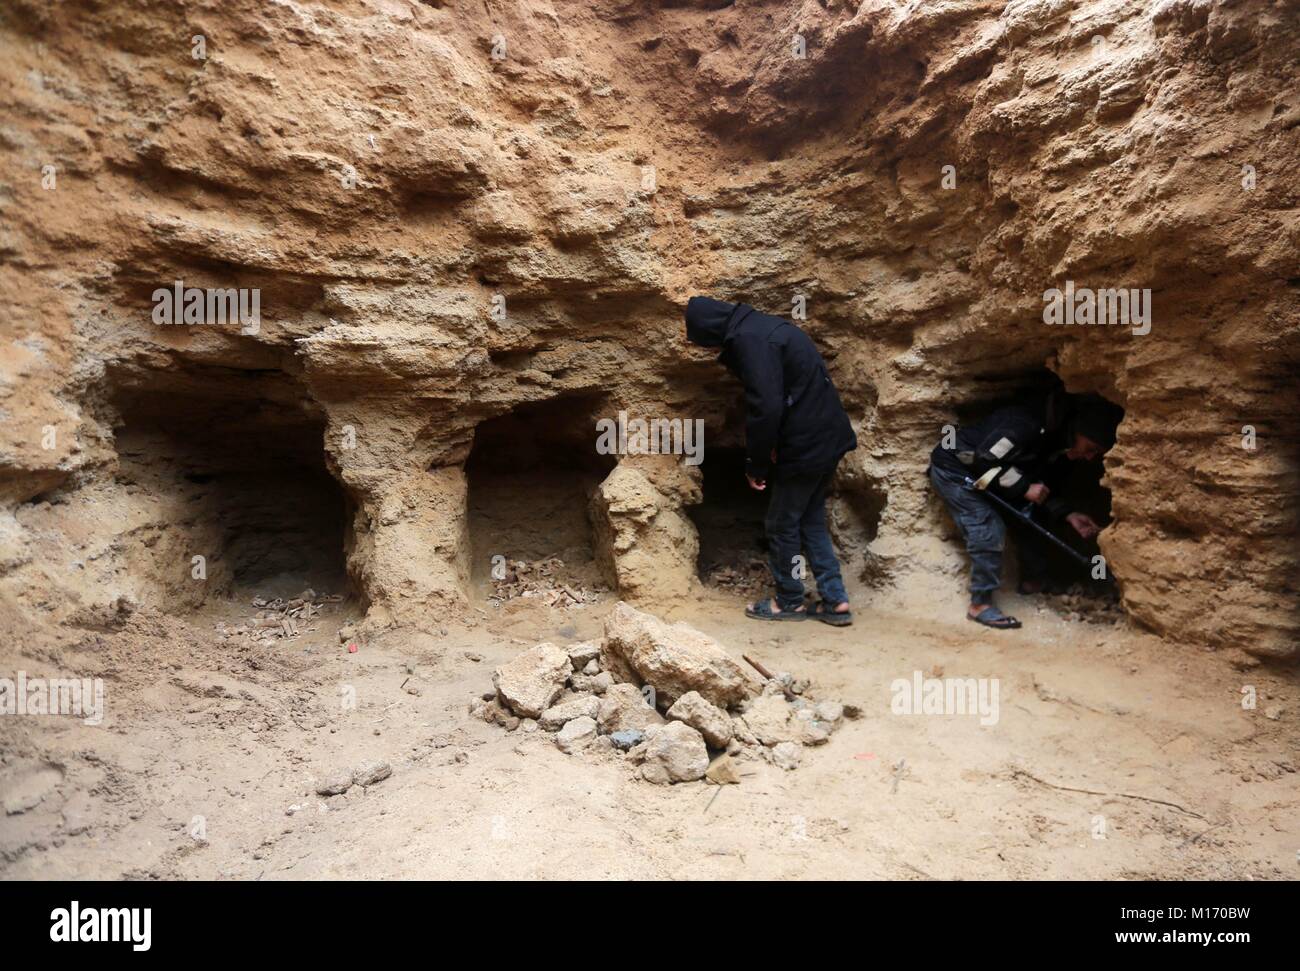 Beit Hanoun, Gaza Strip, Palestinian Territory. 28th Jan, 2018. Palestinians gather at a freshly-discovered cemetery which was found by Abdelkarim al-Kafarna in his backyard in town of Beit Hanoun, in the northern Gaza strip on January 27, 2018. Experts said the graves were part of a loculus tomb that possibly dates from the late Roman-Byzantine era in the fourth to sixth century CE where Gaza was part of the far-flung Roman Empire Credit: Mohammed Asad/APA Images/ZUMA Wire/Alamy Live News Stock Photo